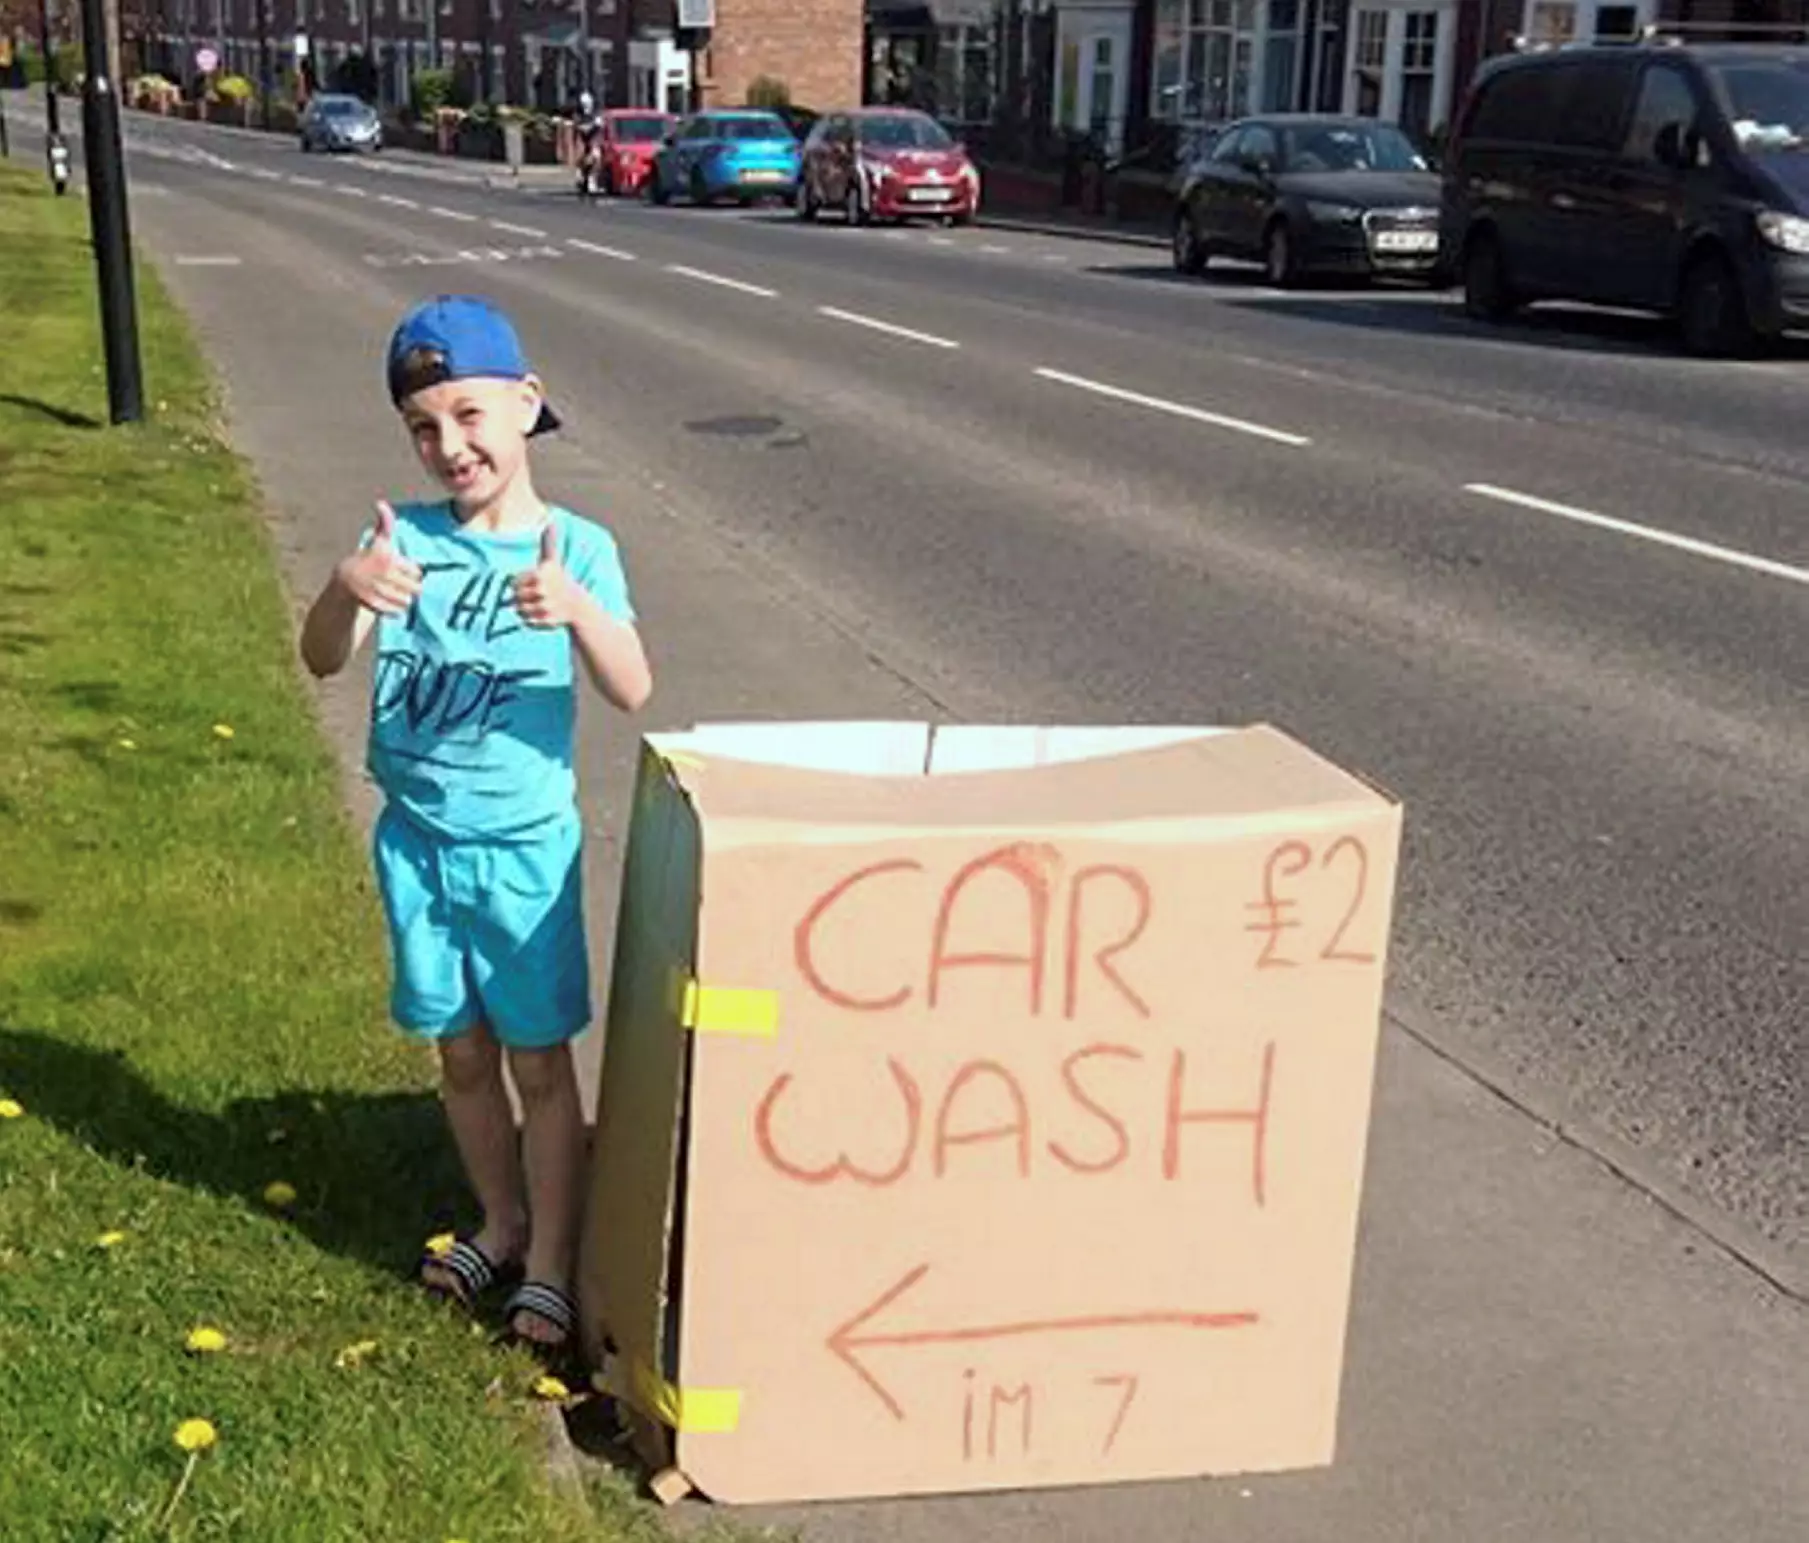 The little boy set up his own car wash to raise money for flowers for his nan's funeral.